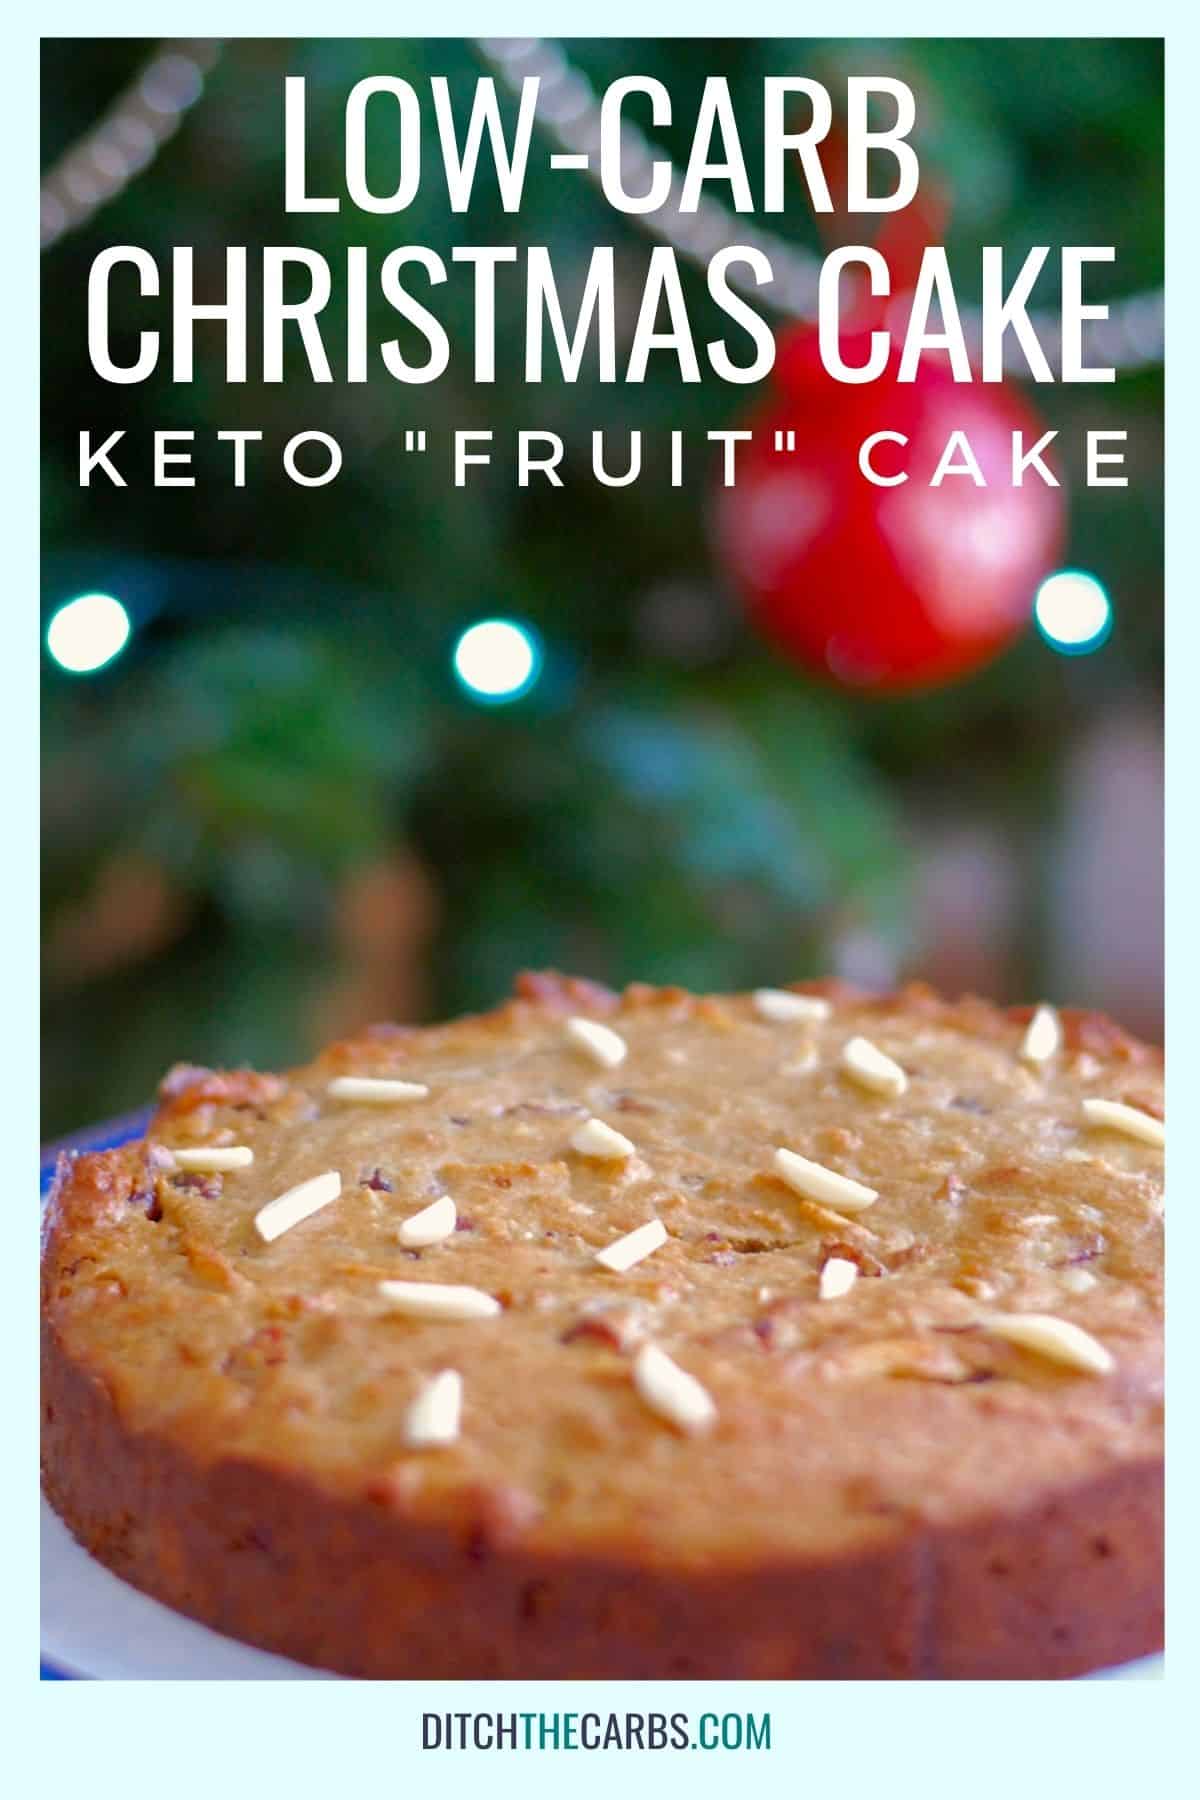 low-carb Christmas cake sitting in front of a Christmas tree